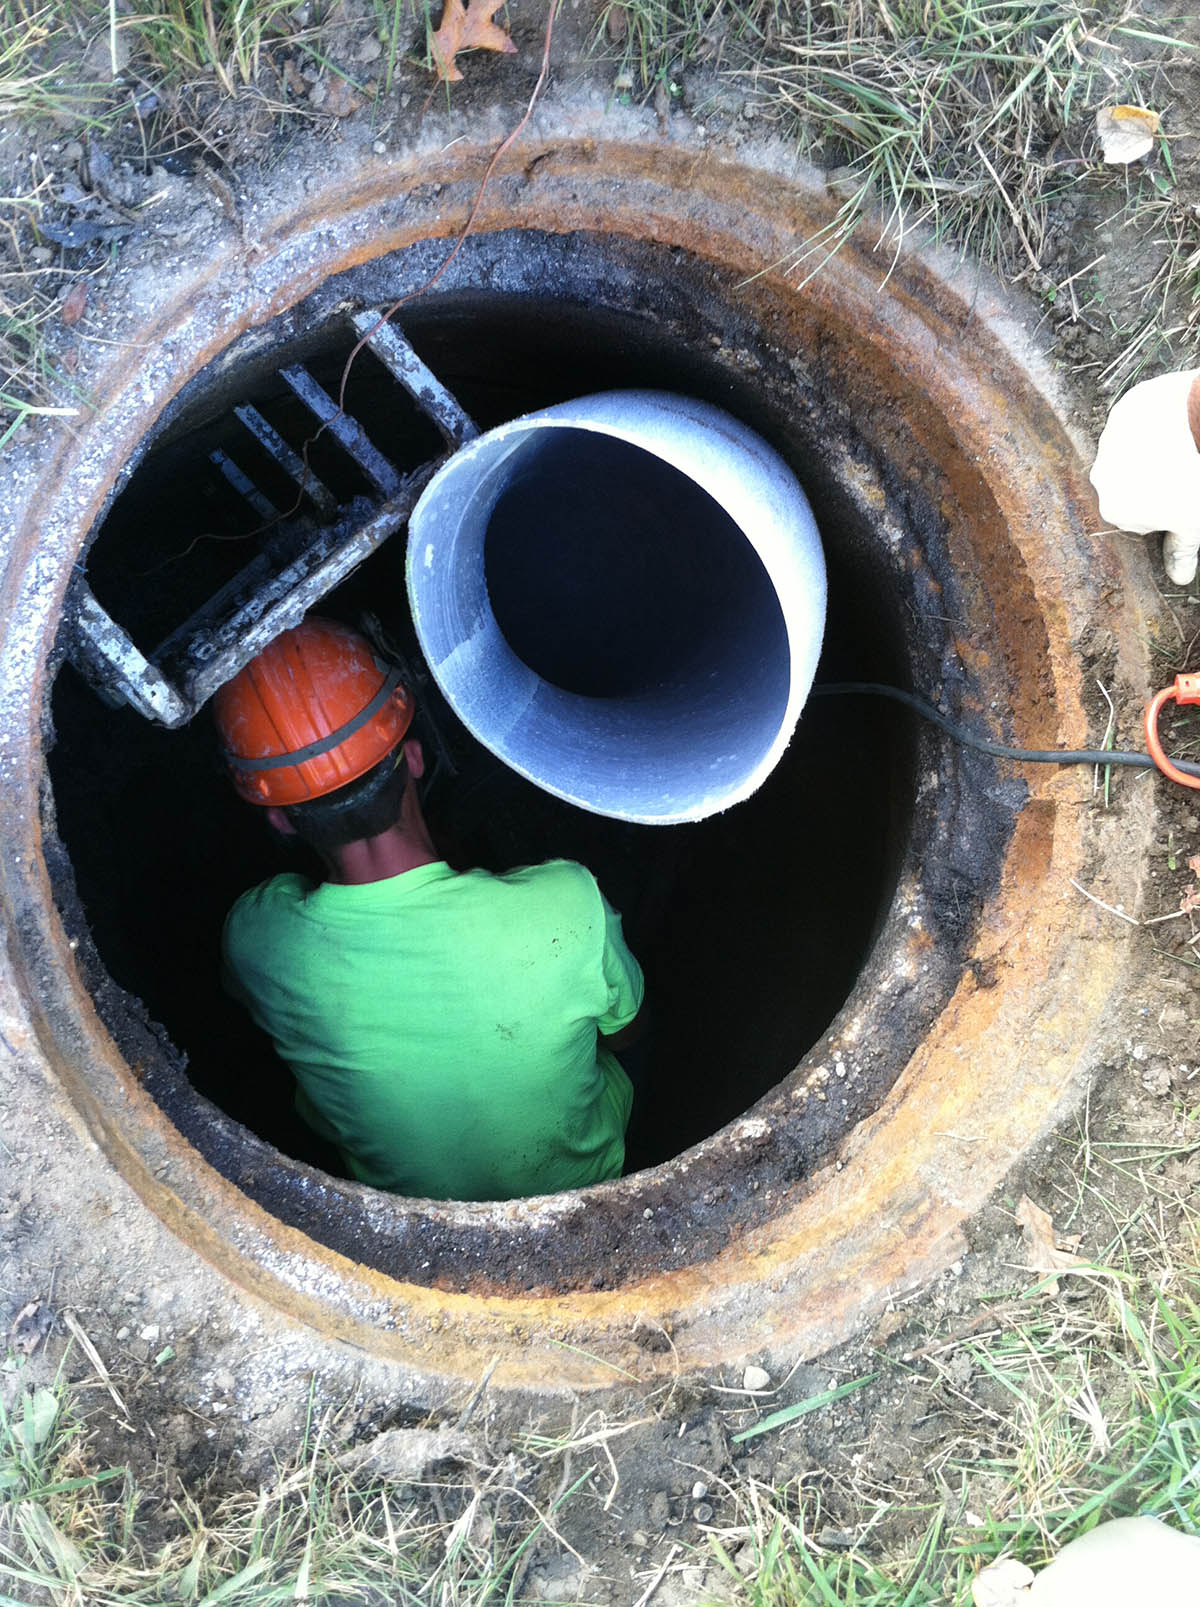 Reline Your Sewer Pipes With Perma-Liner!